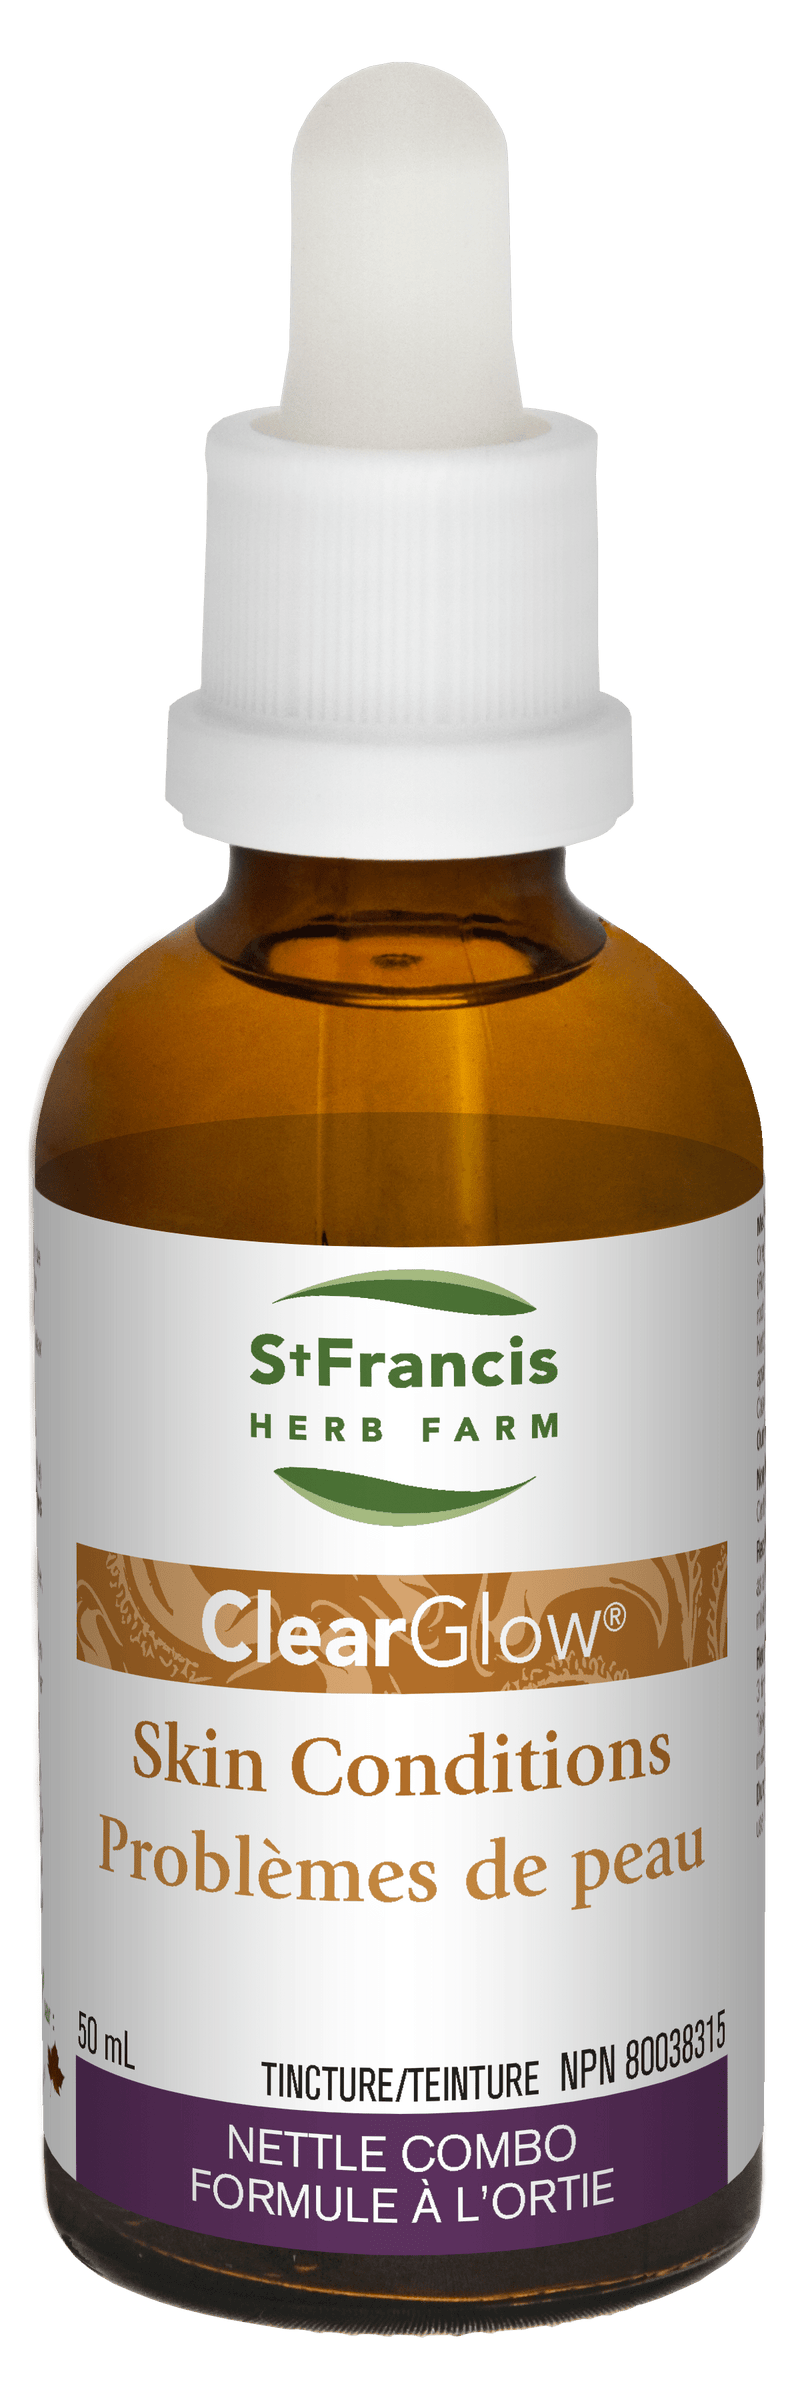 St Francis Herb Farm ClearGlow 50 ml